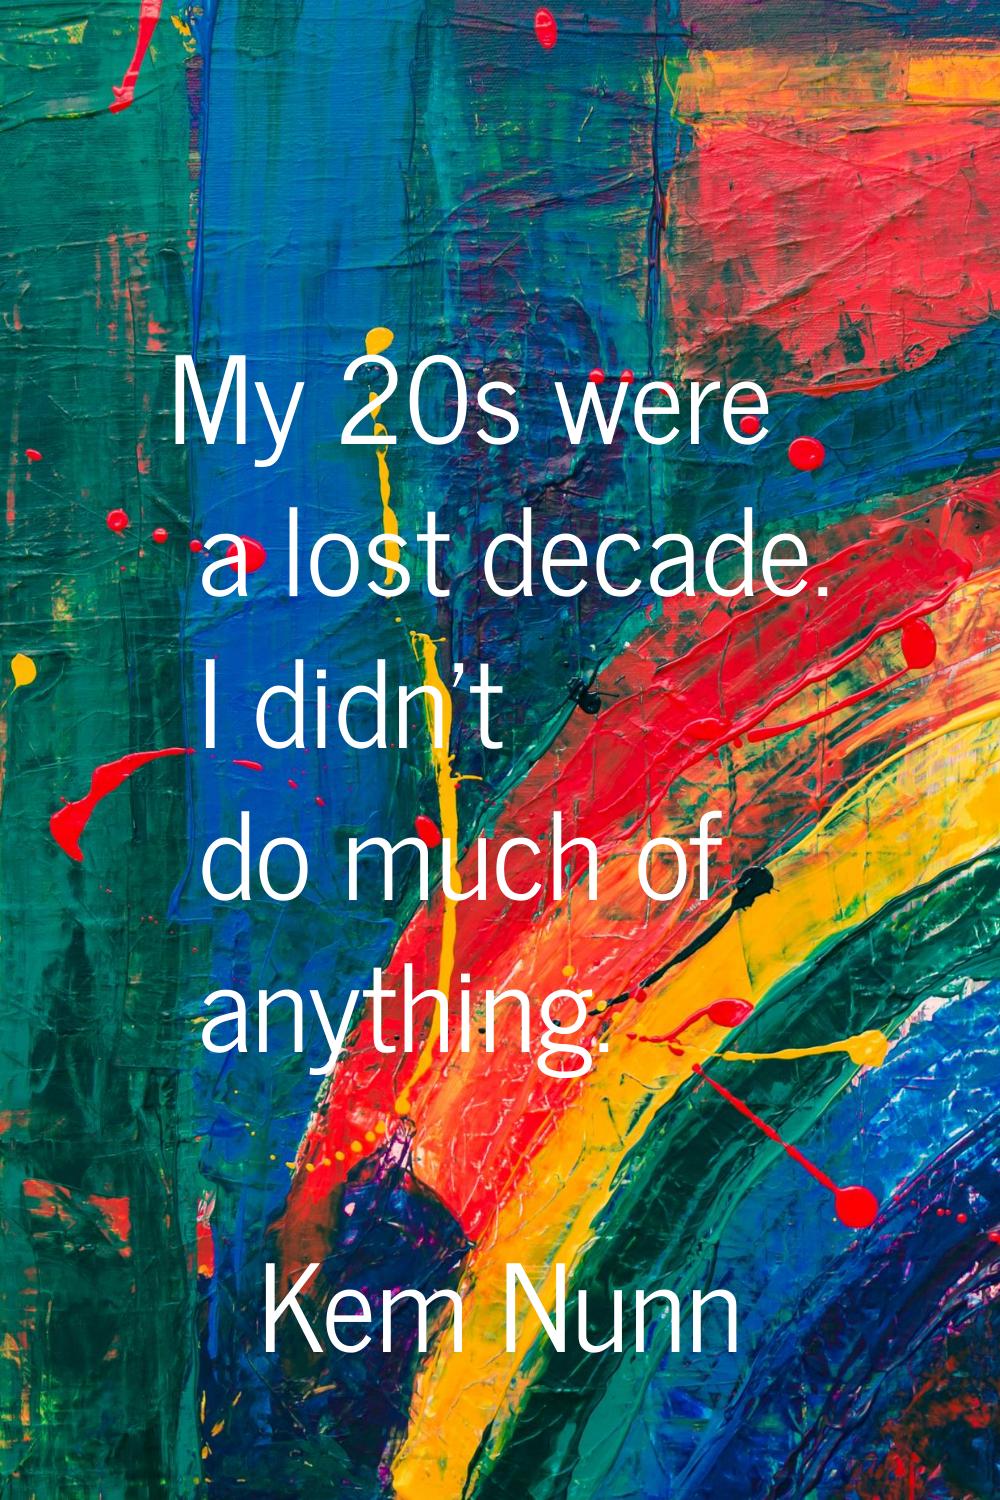 My 20s were a lost decade. I didn't do much of anything.